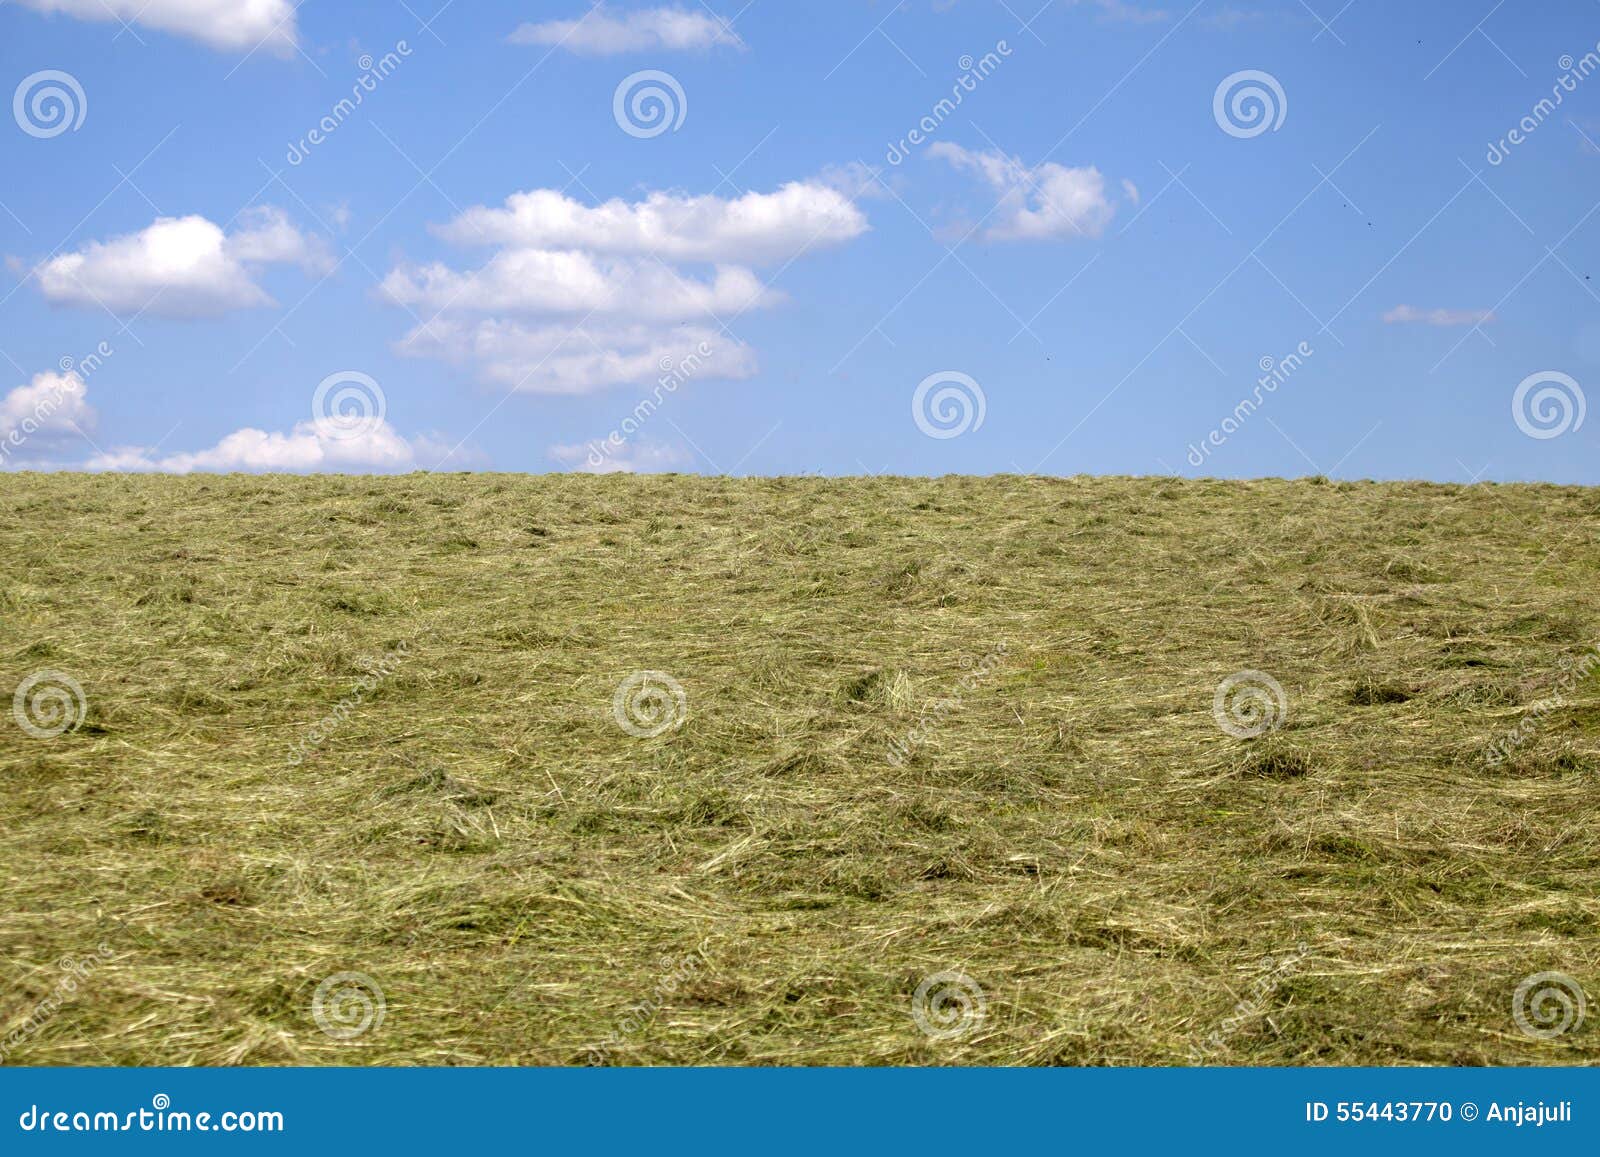 Harvesting Hay Cut Grass Drying Stock Photo Image Of Growing Mellow